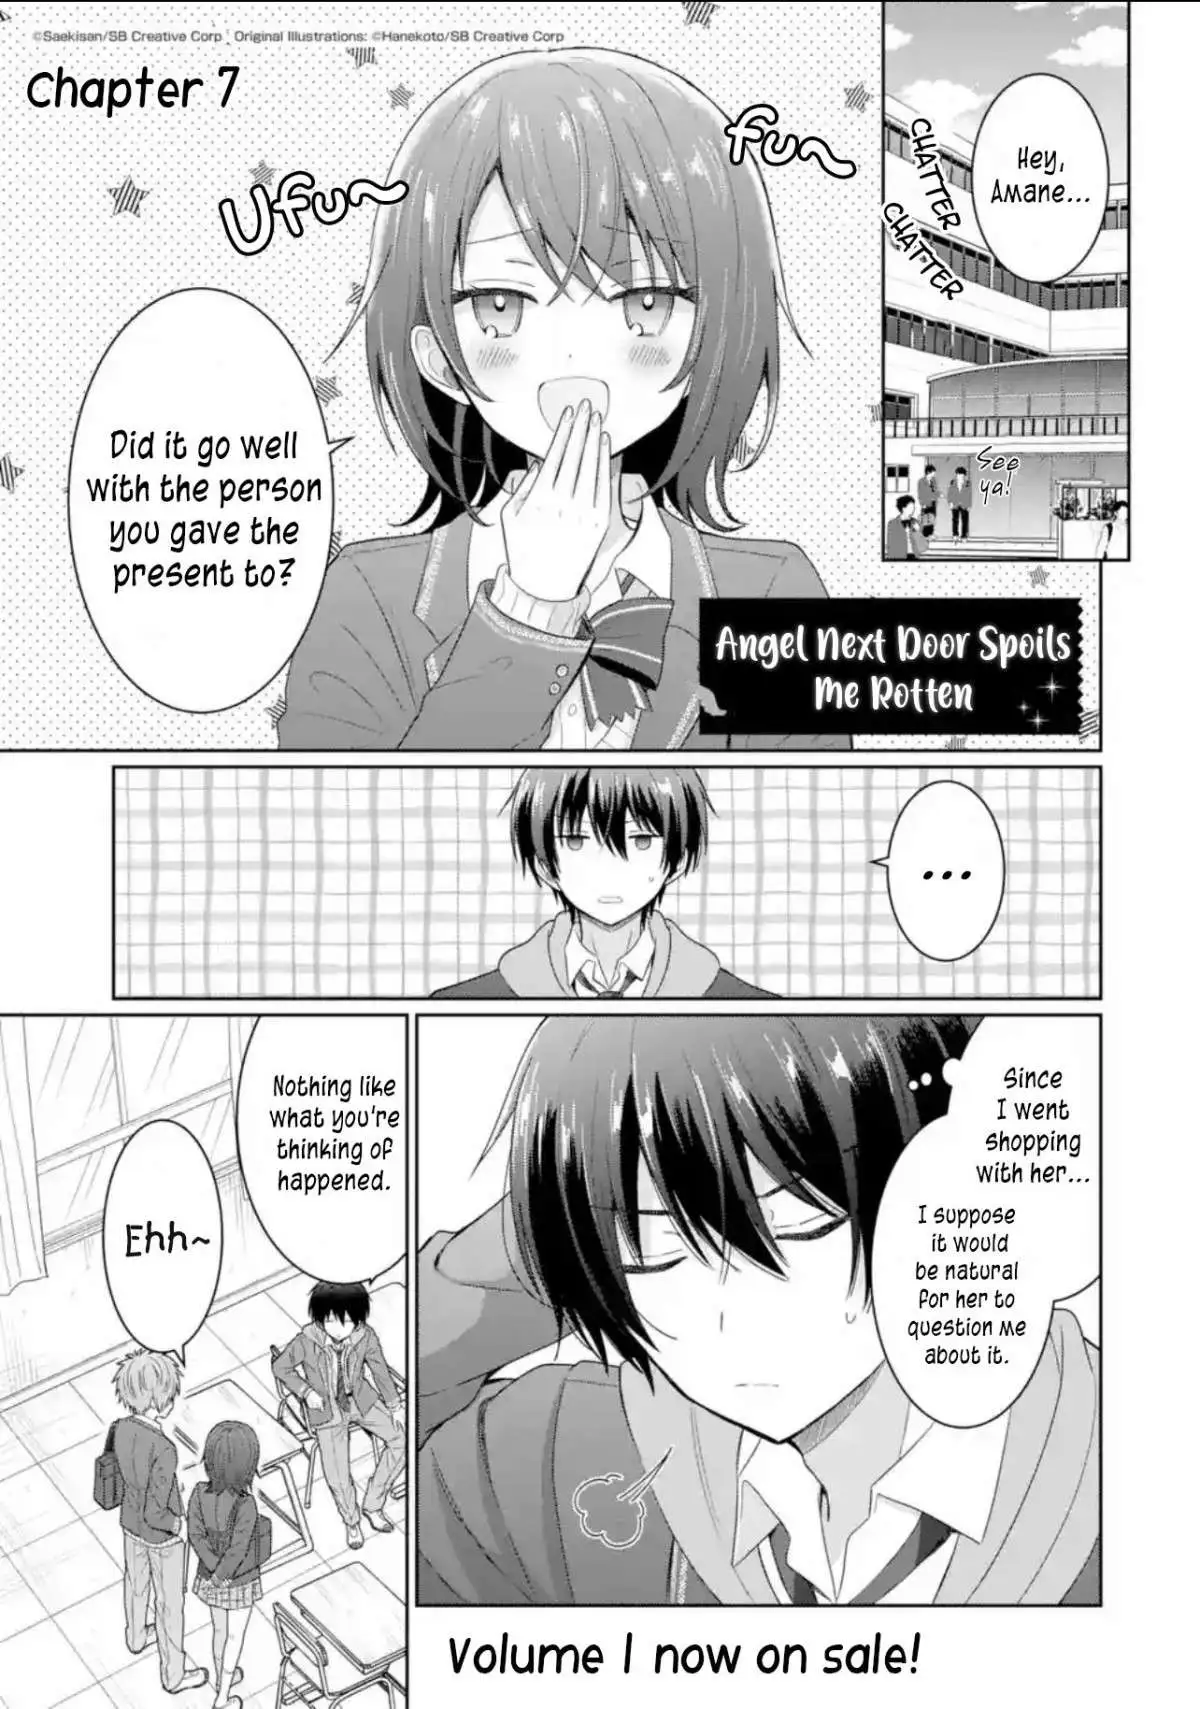 The Angel Next Door Spoils Me Rotten: After The Rain - 7.1 page 2-cbd84f66